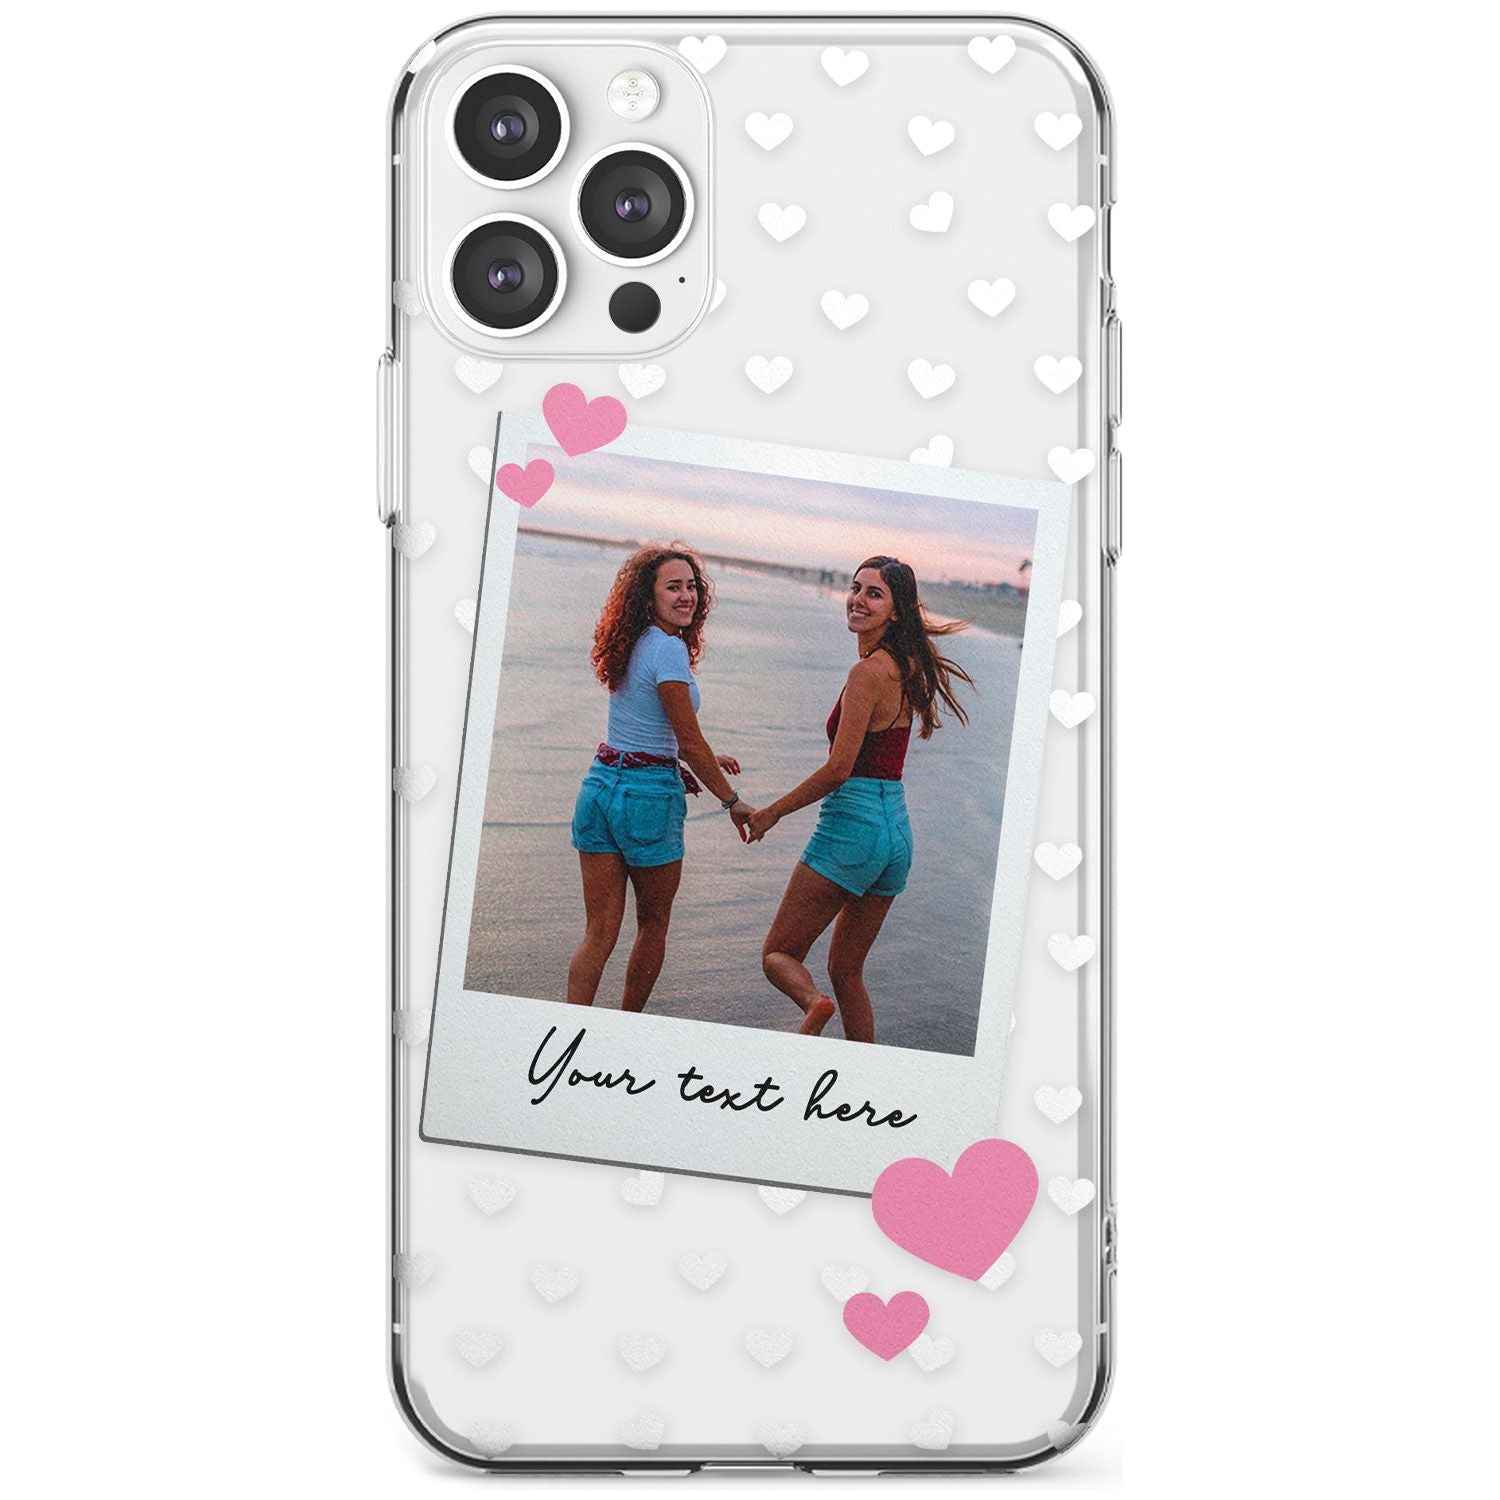 Instant Film & Hearts Black Impact Phone Case for iPhone 11 Pro Max